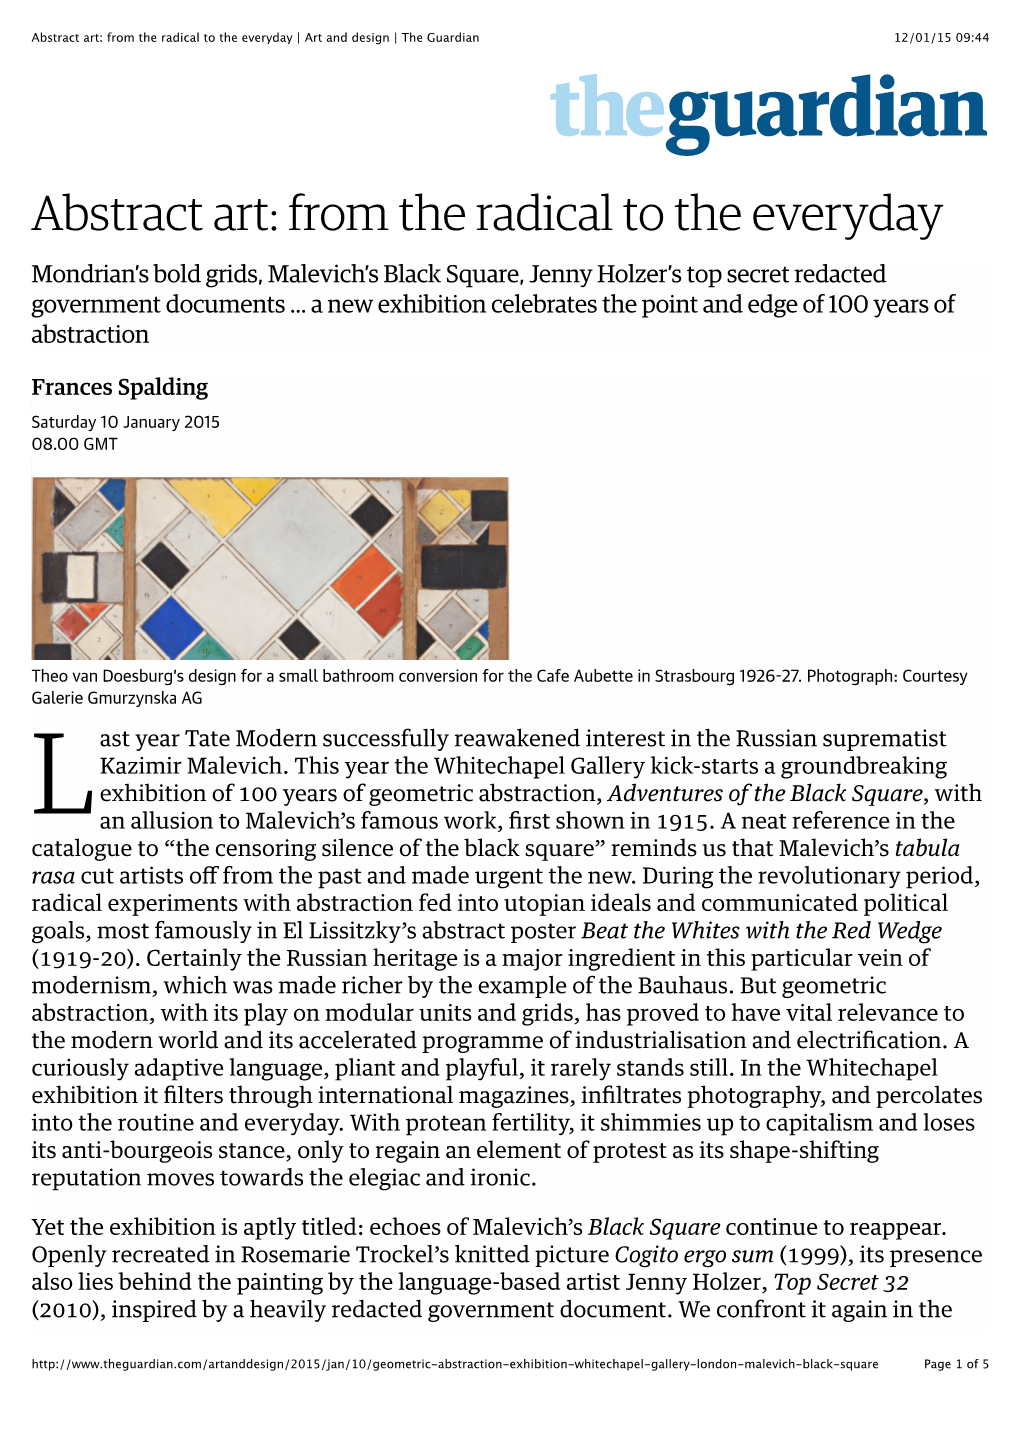 Abstract Art: from the Radical to the Everyday | Art and Design | the Guardian 12/01/15 09:44